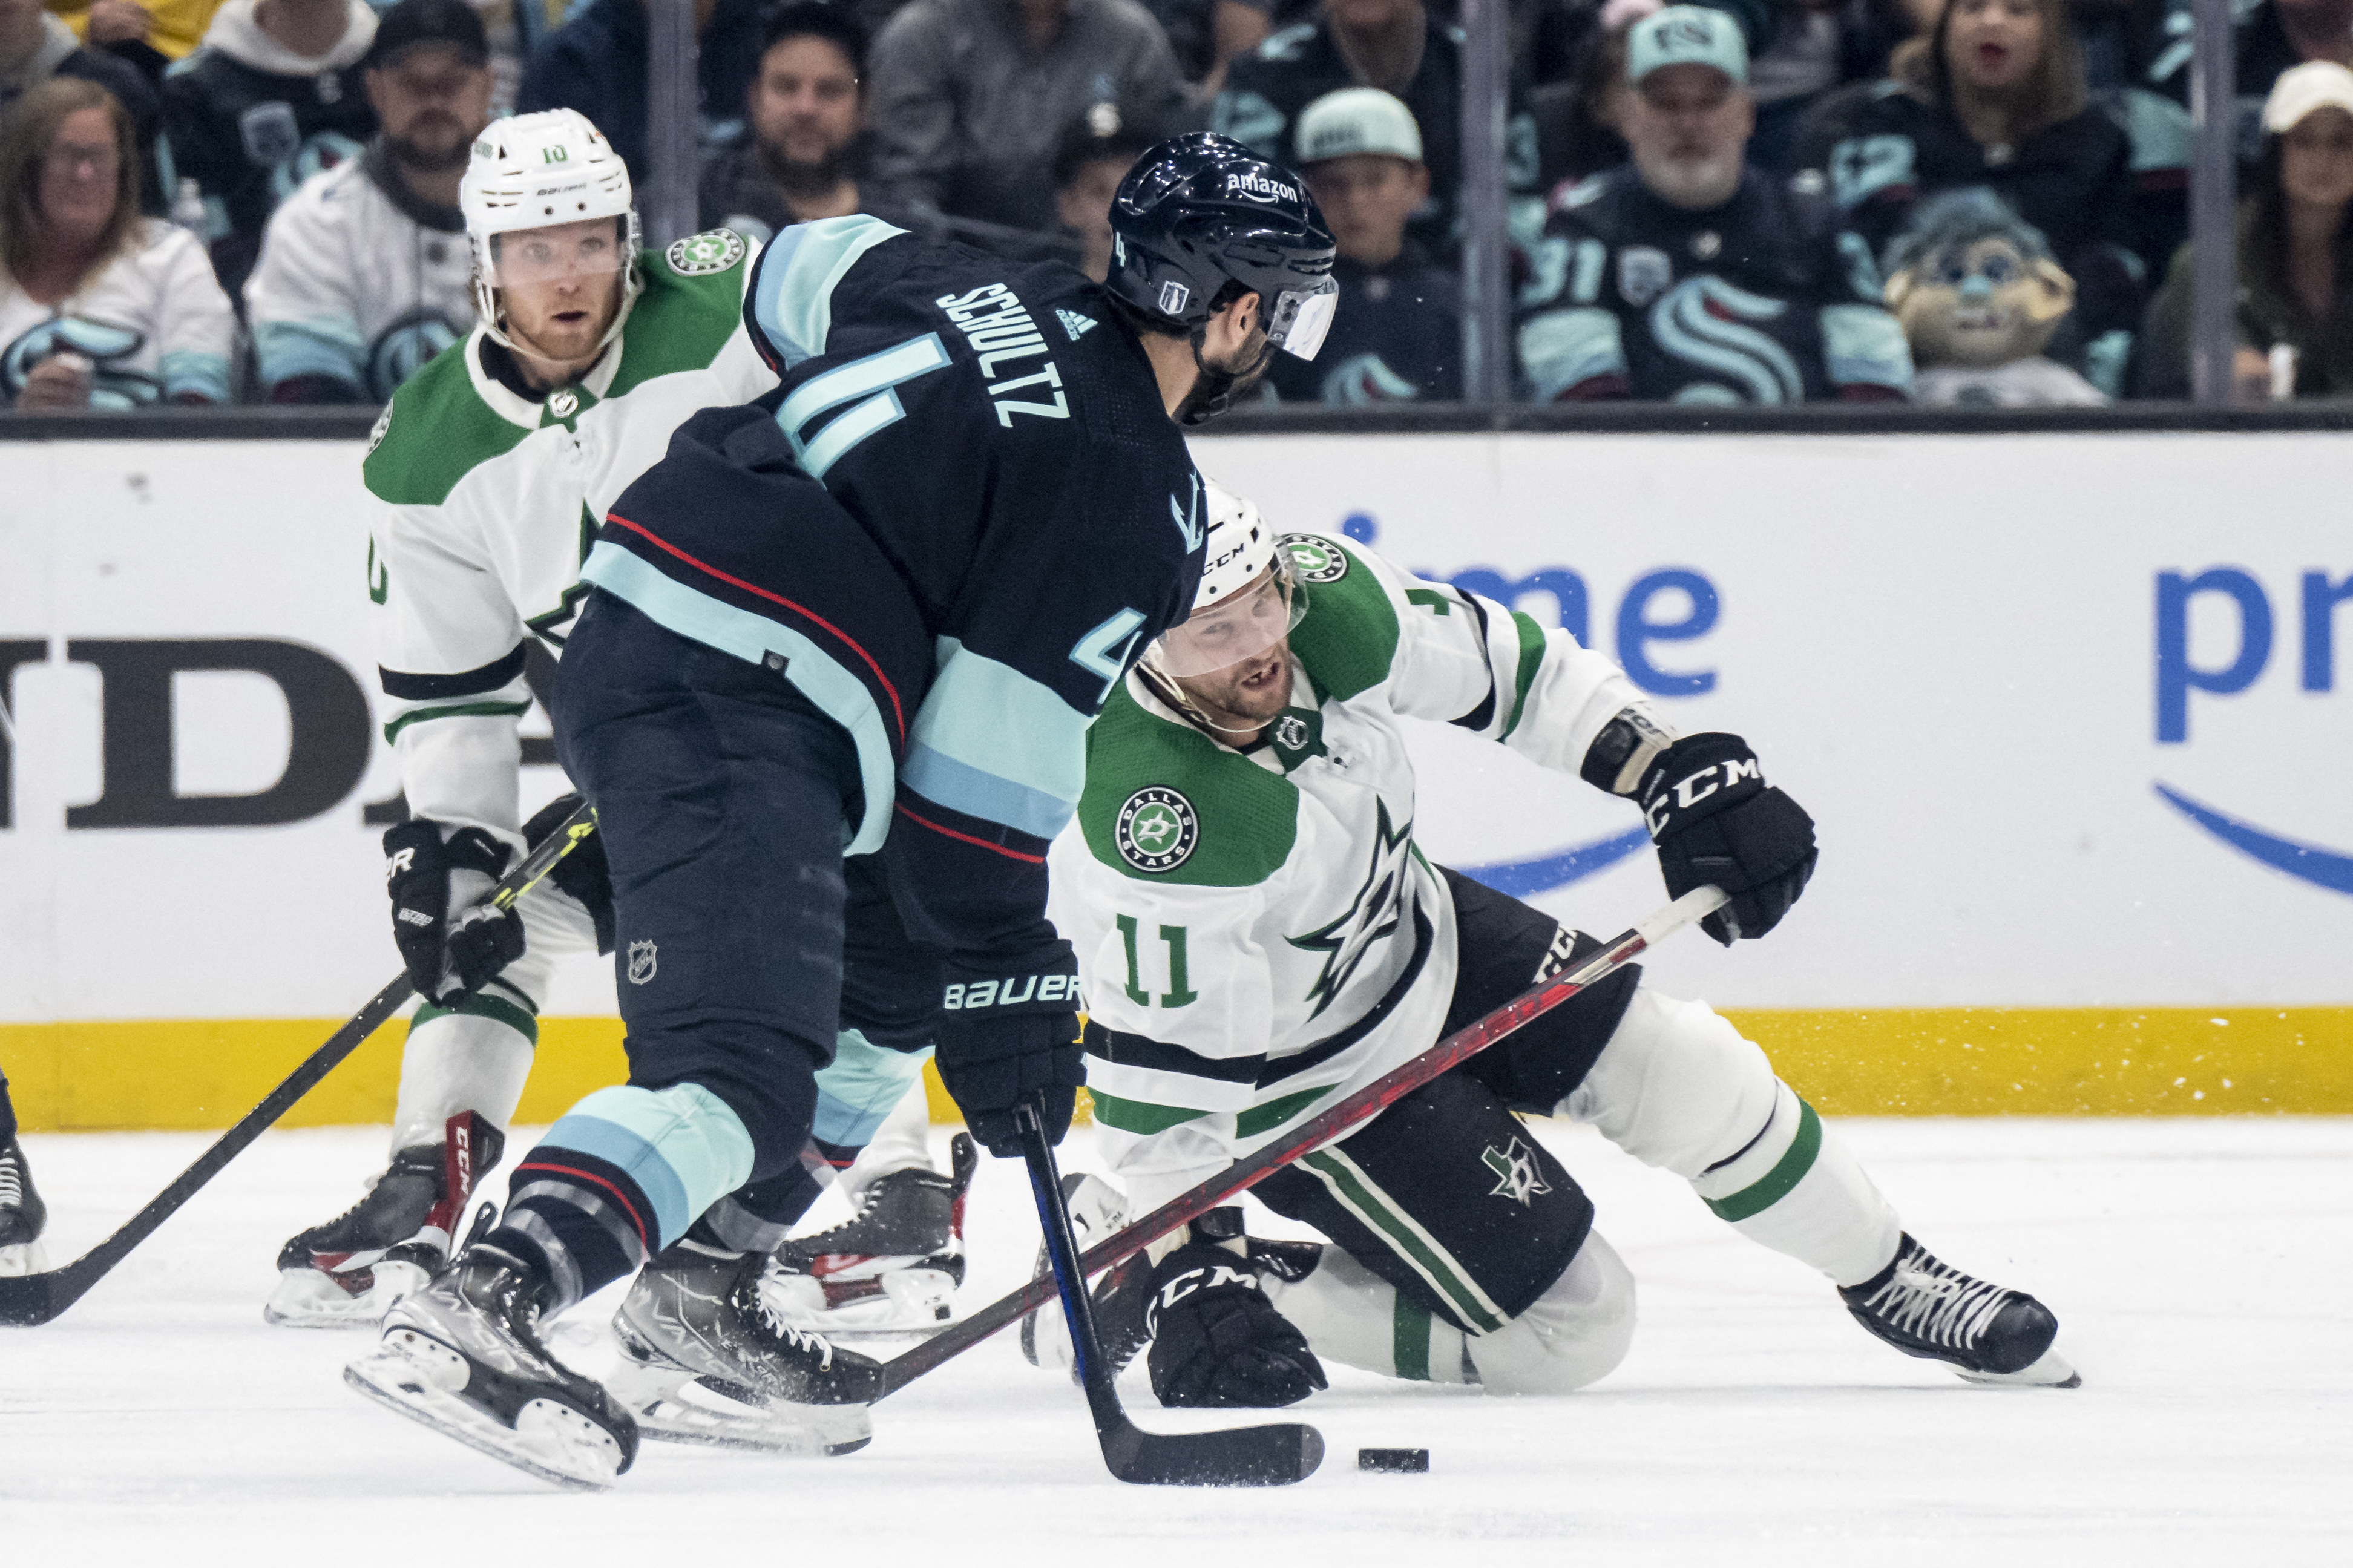 NHL Cup Watch: Carson Soucy has big impact in Seattle's win; Beniers,  Schultz adds 2 points apiece for Kraken - The Rink Live